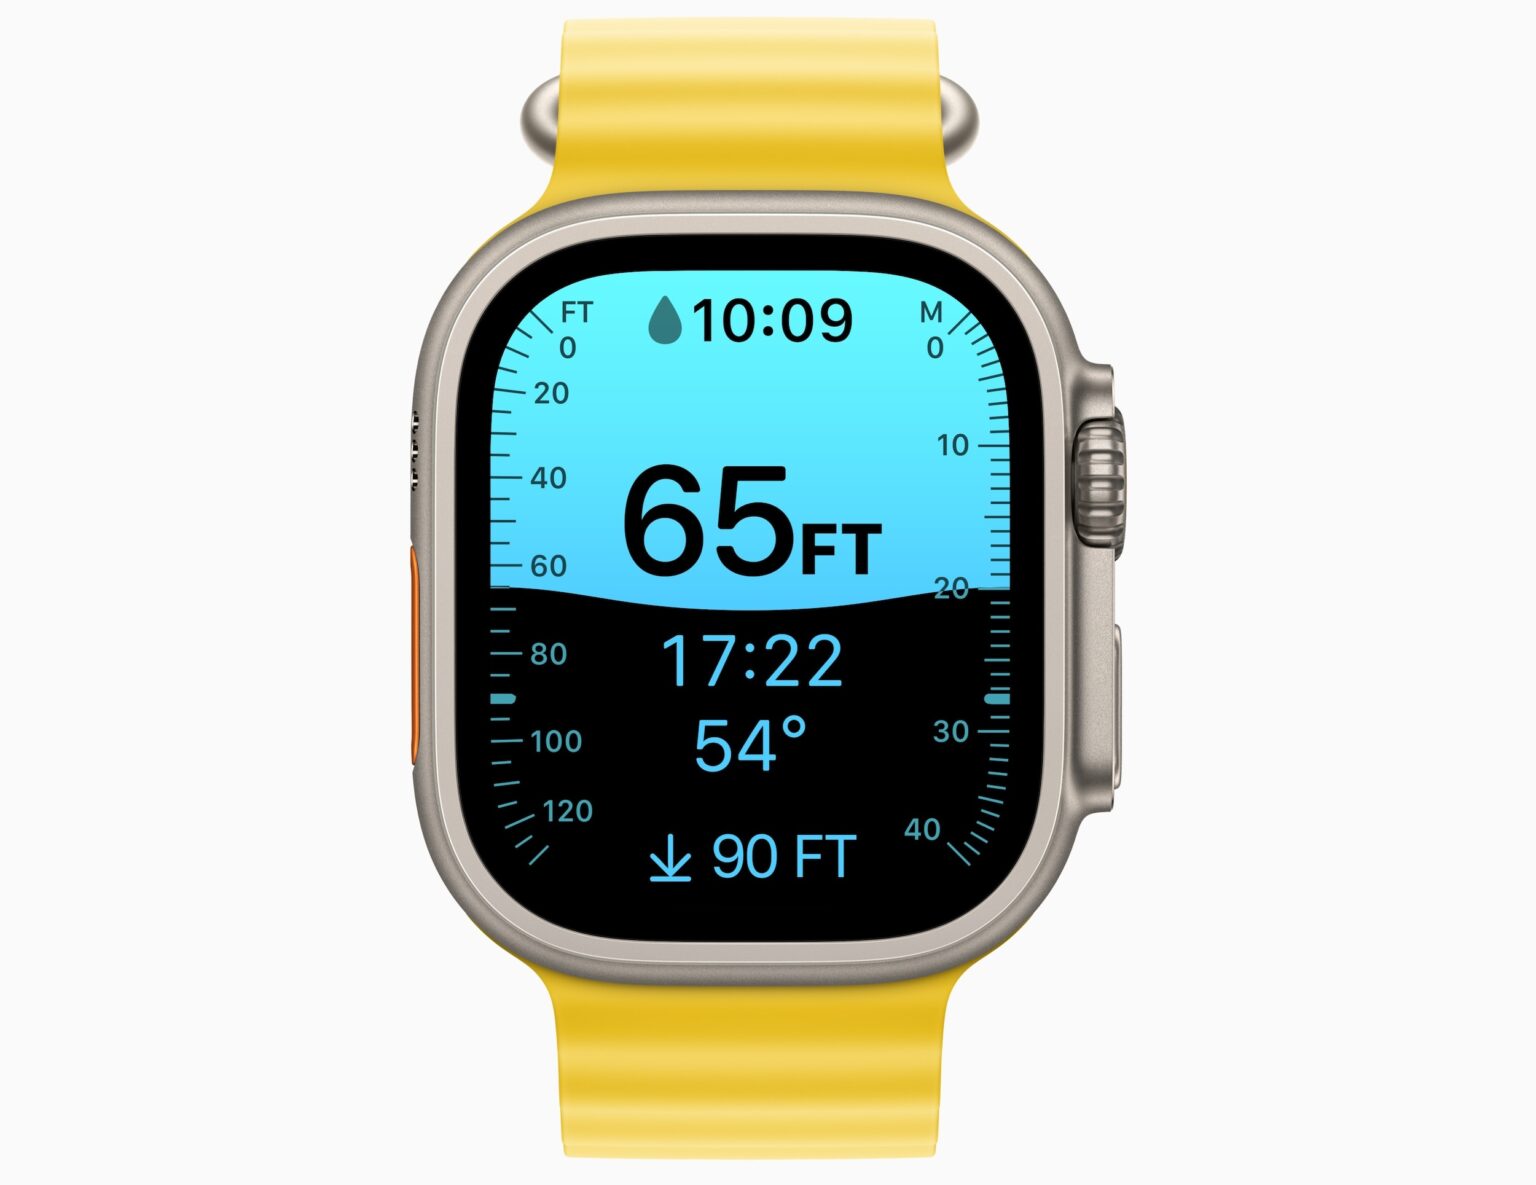 Apple Watch Ultra sale on models with Ocean band, like this yellow one